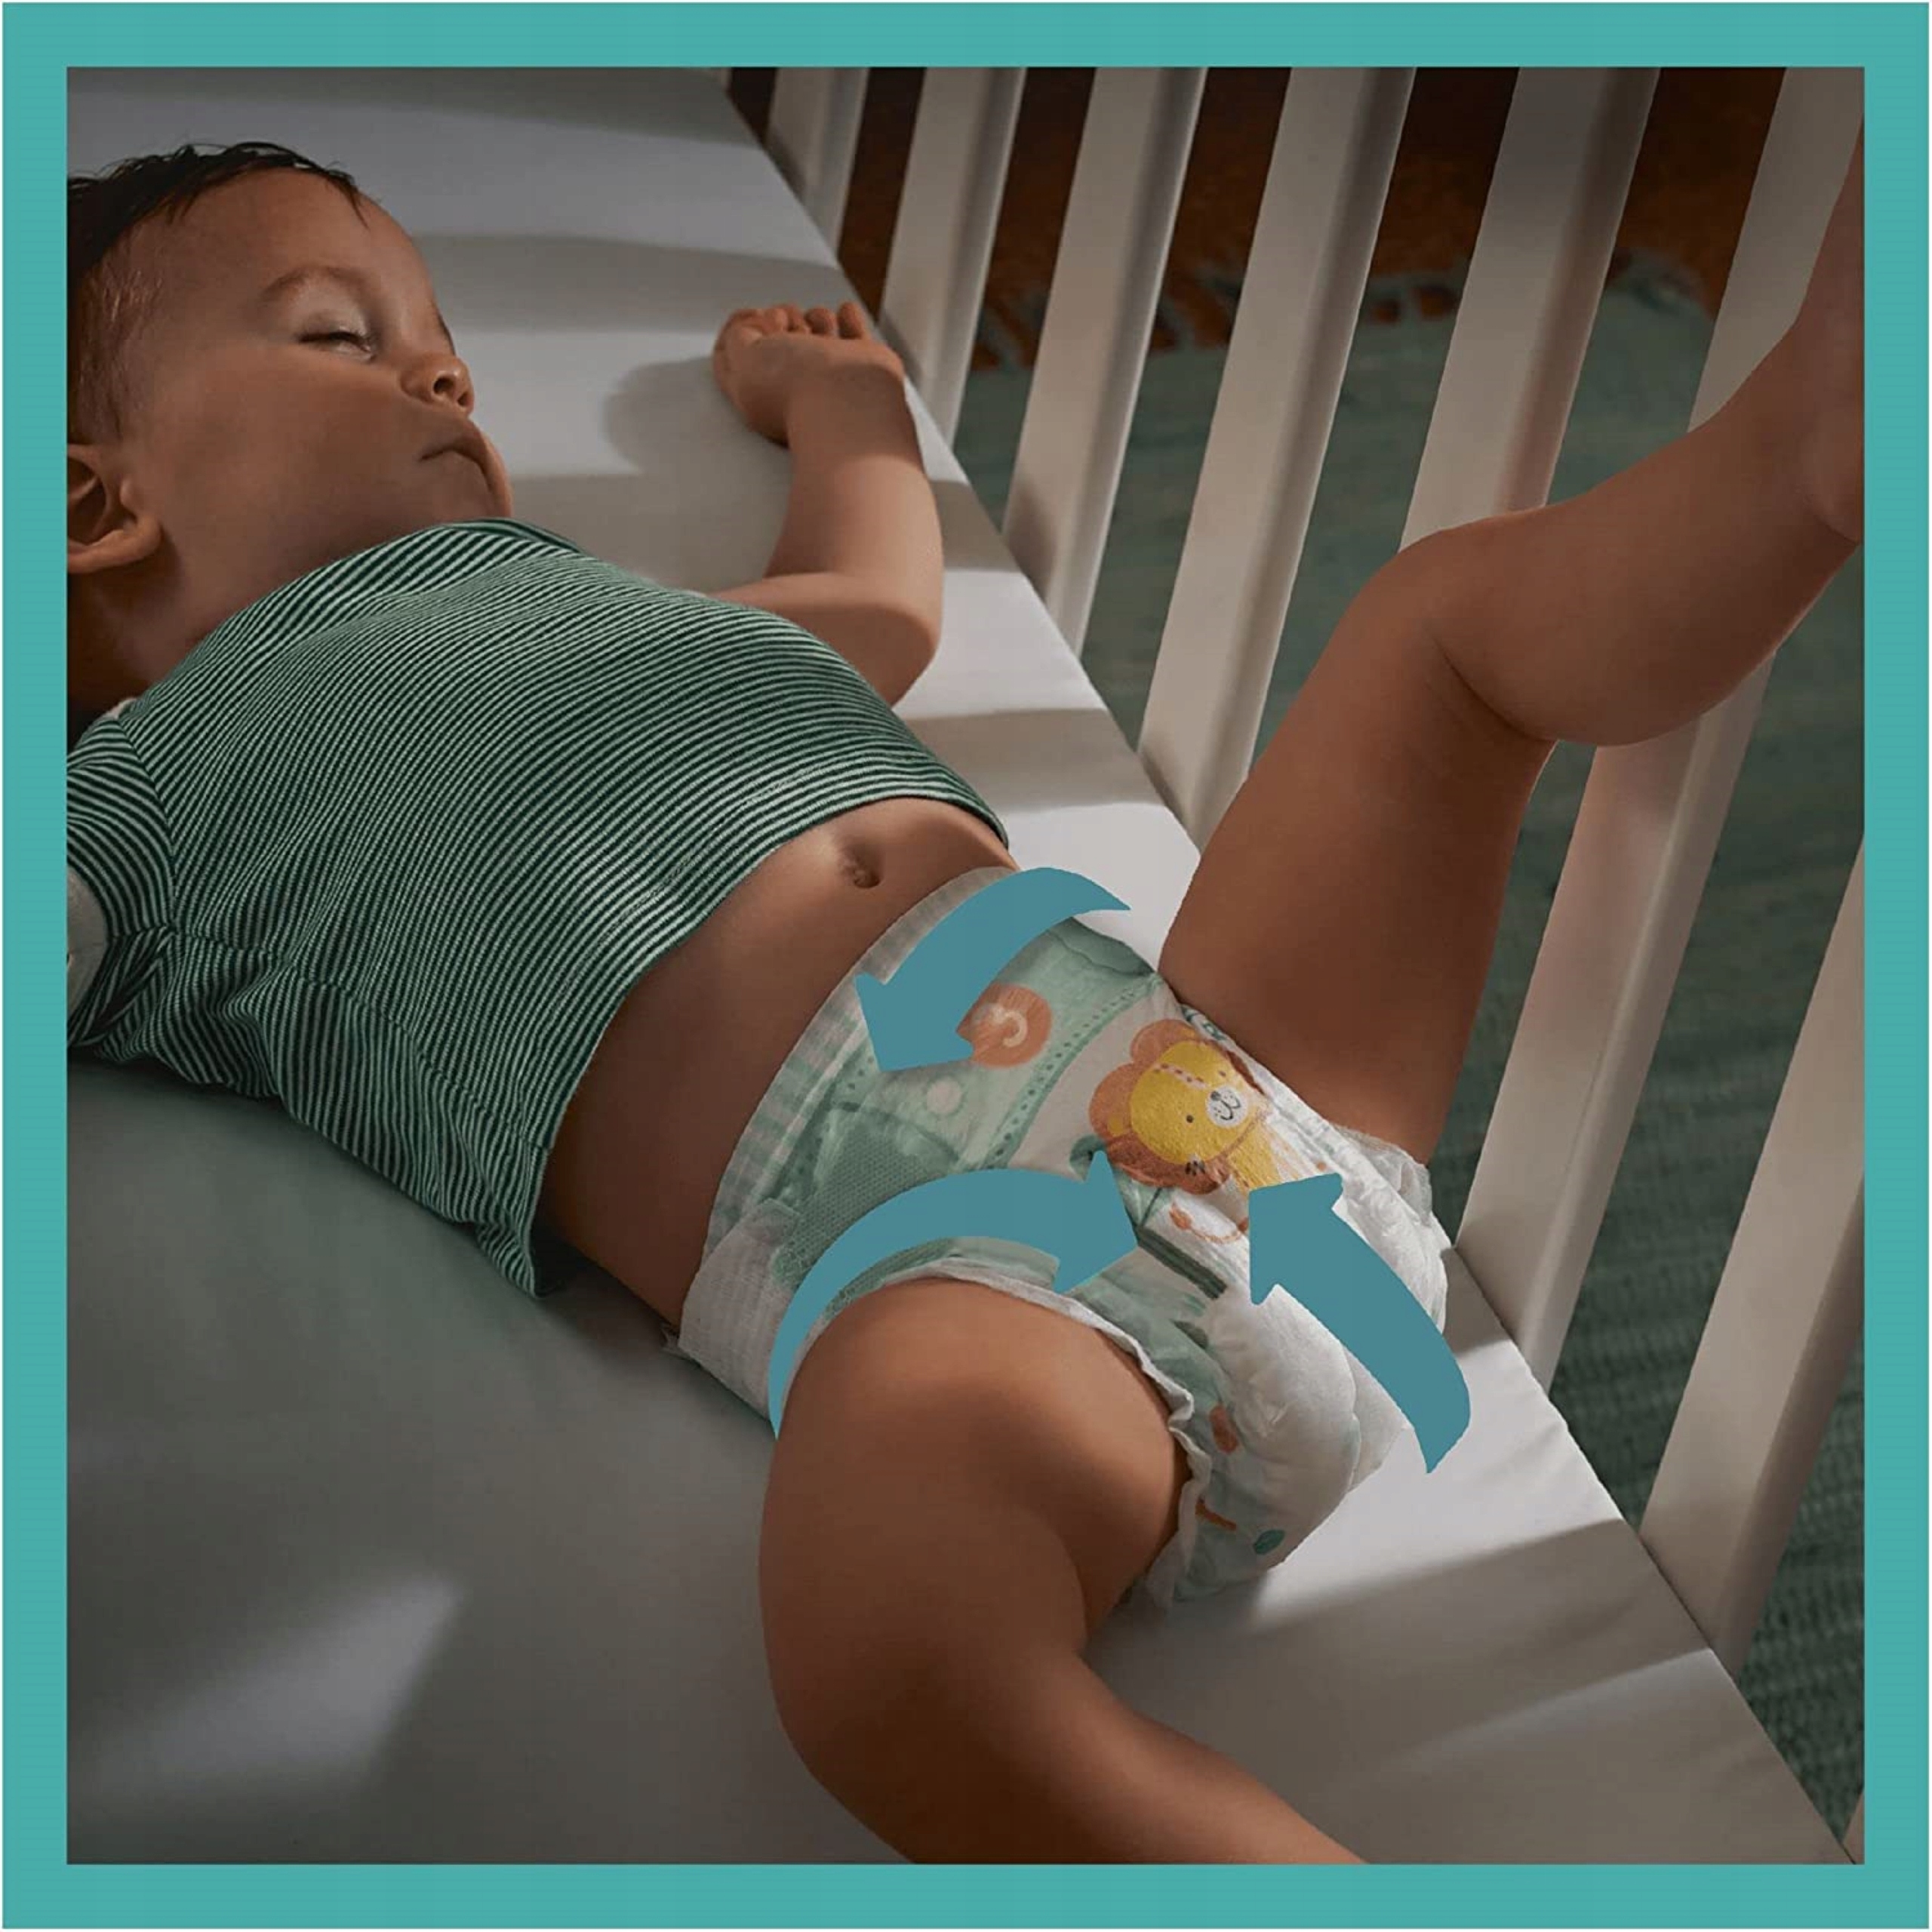 pampers 76 szt